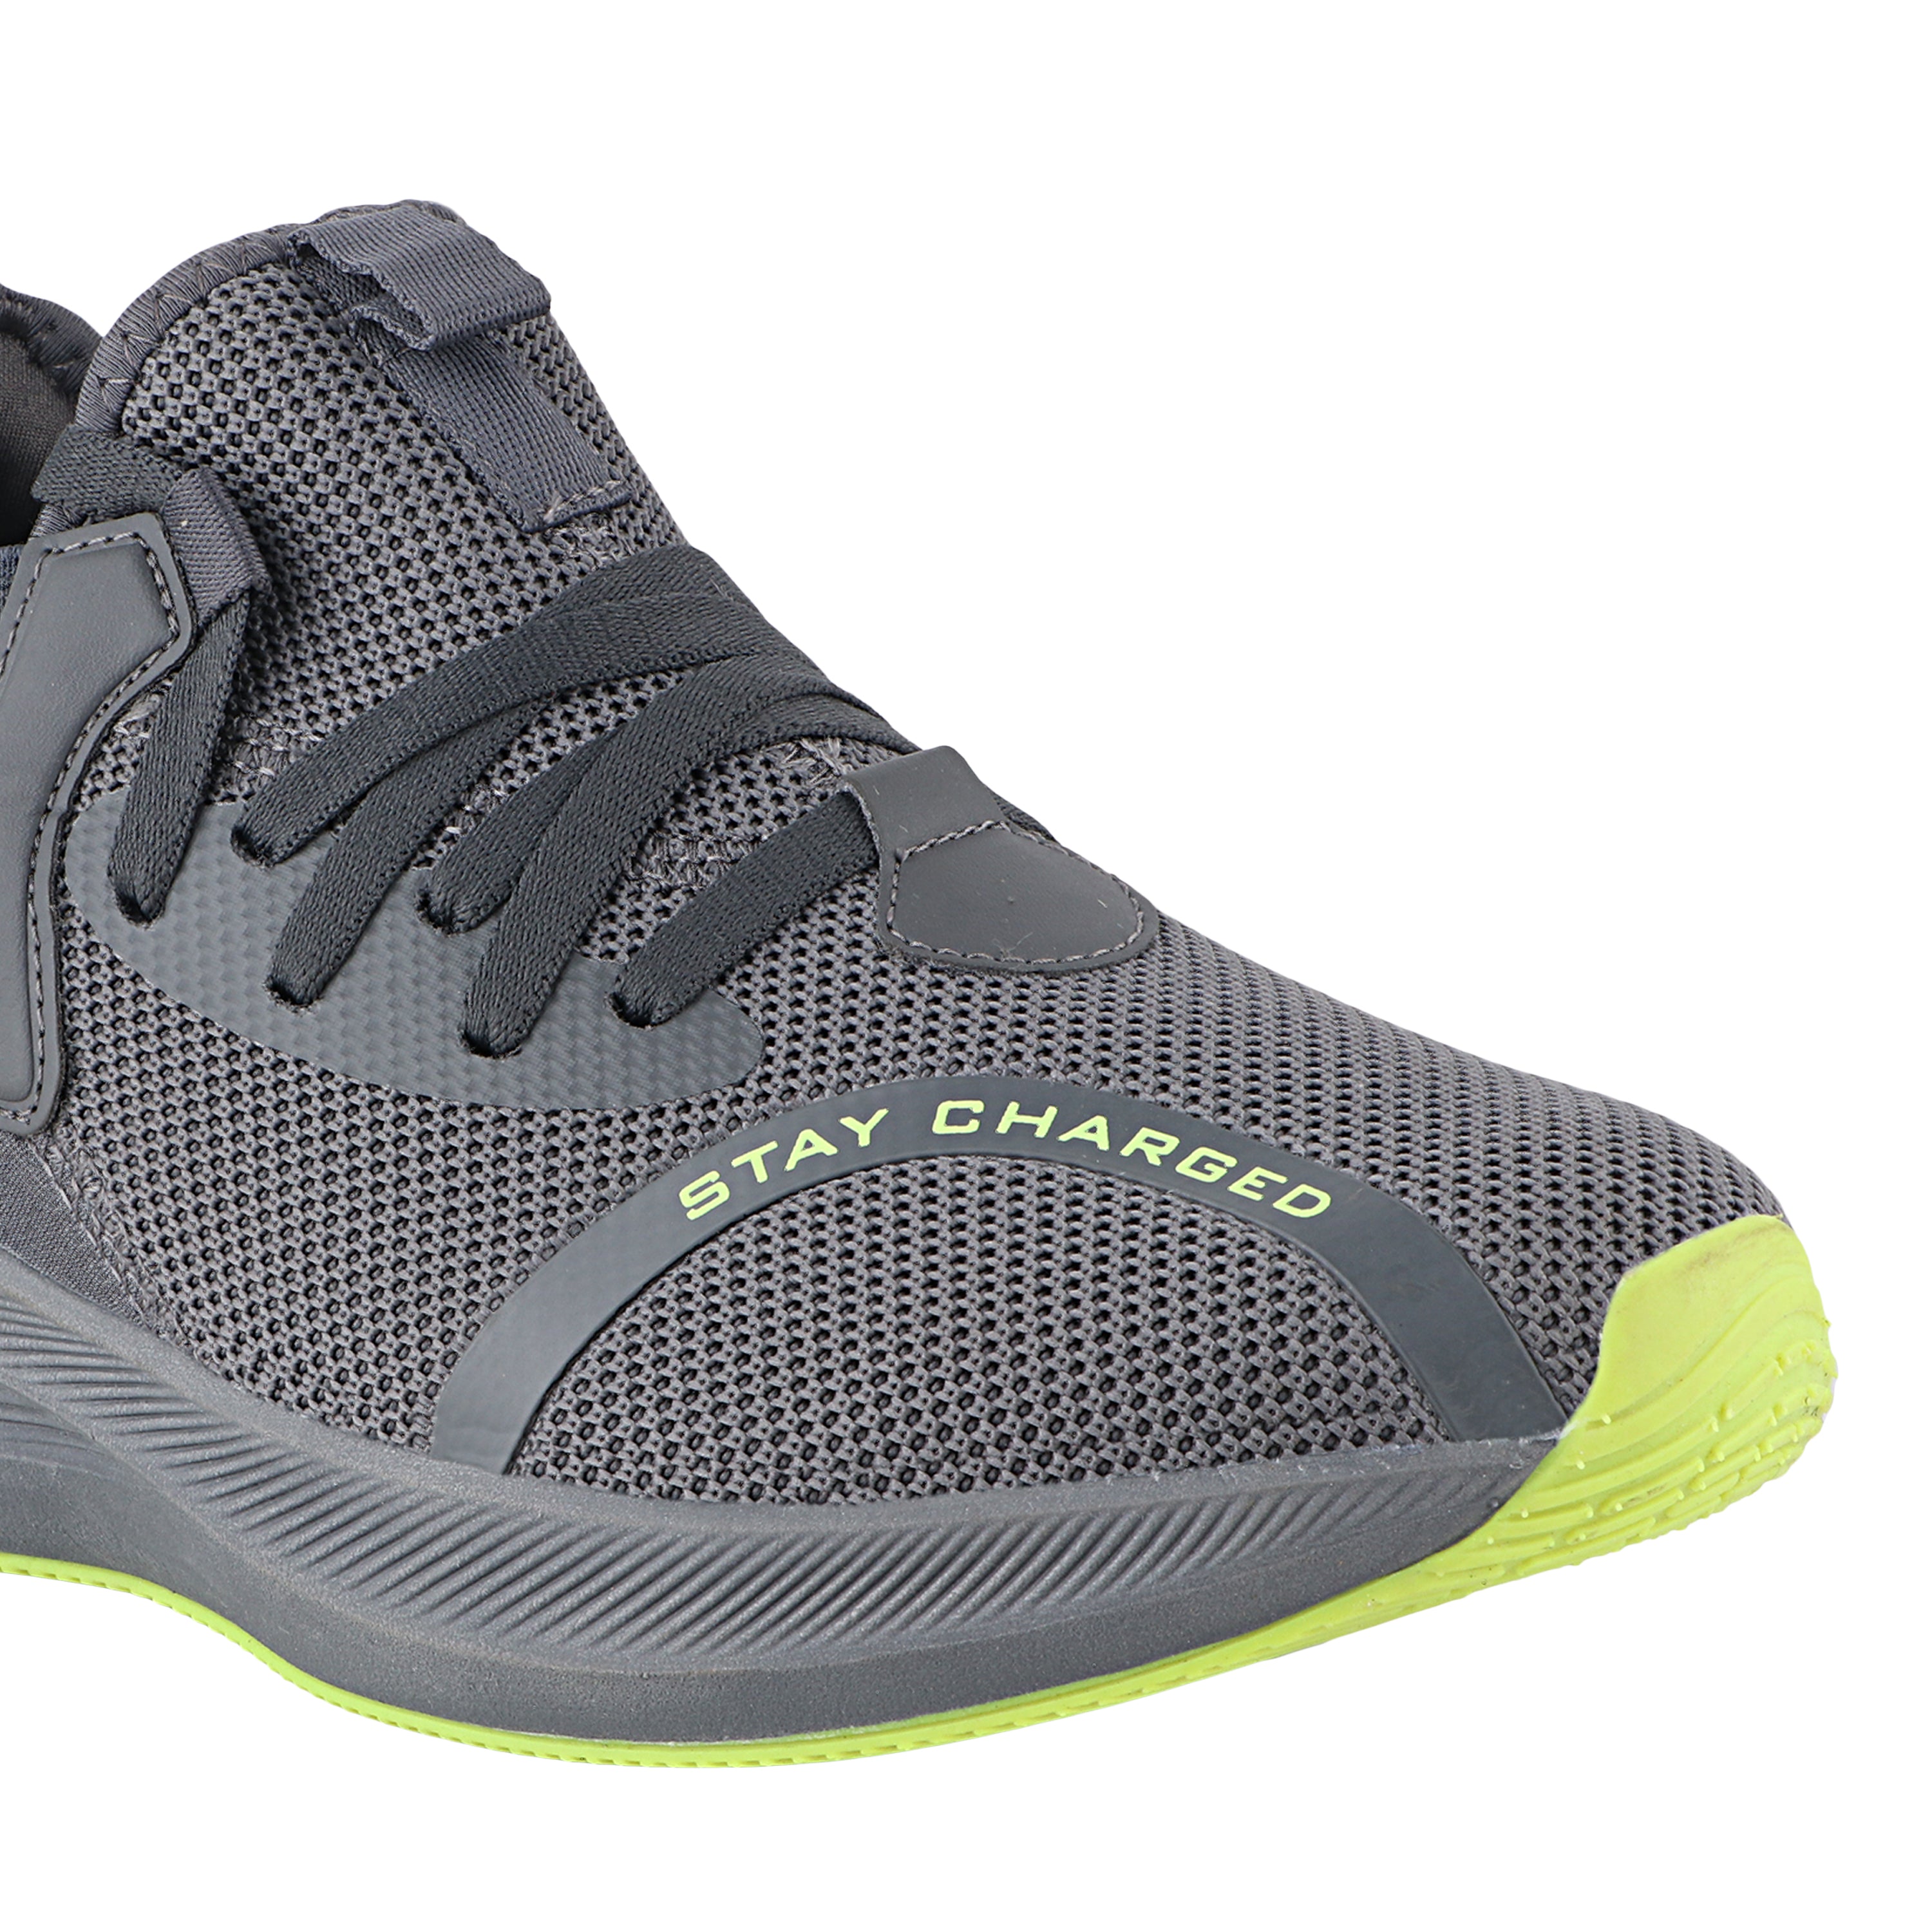 Fuel Wine Sports Shoes For Men (D-Grey-P-Green)